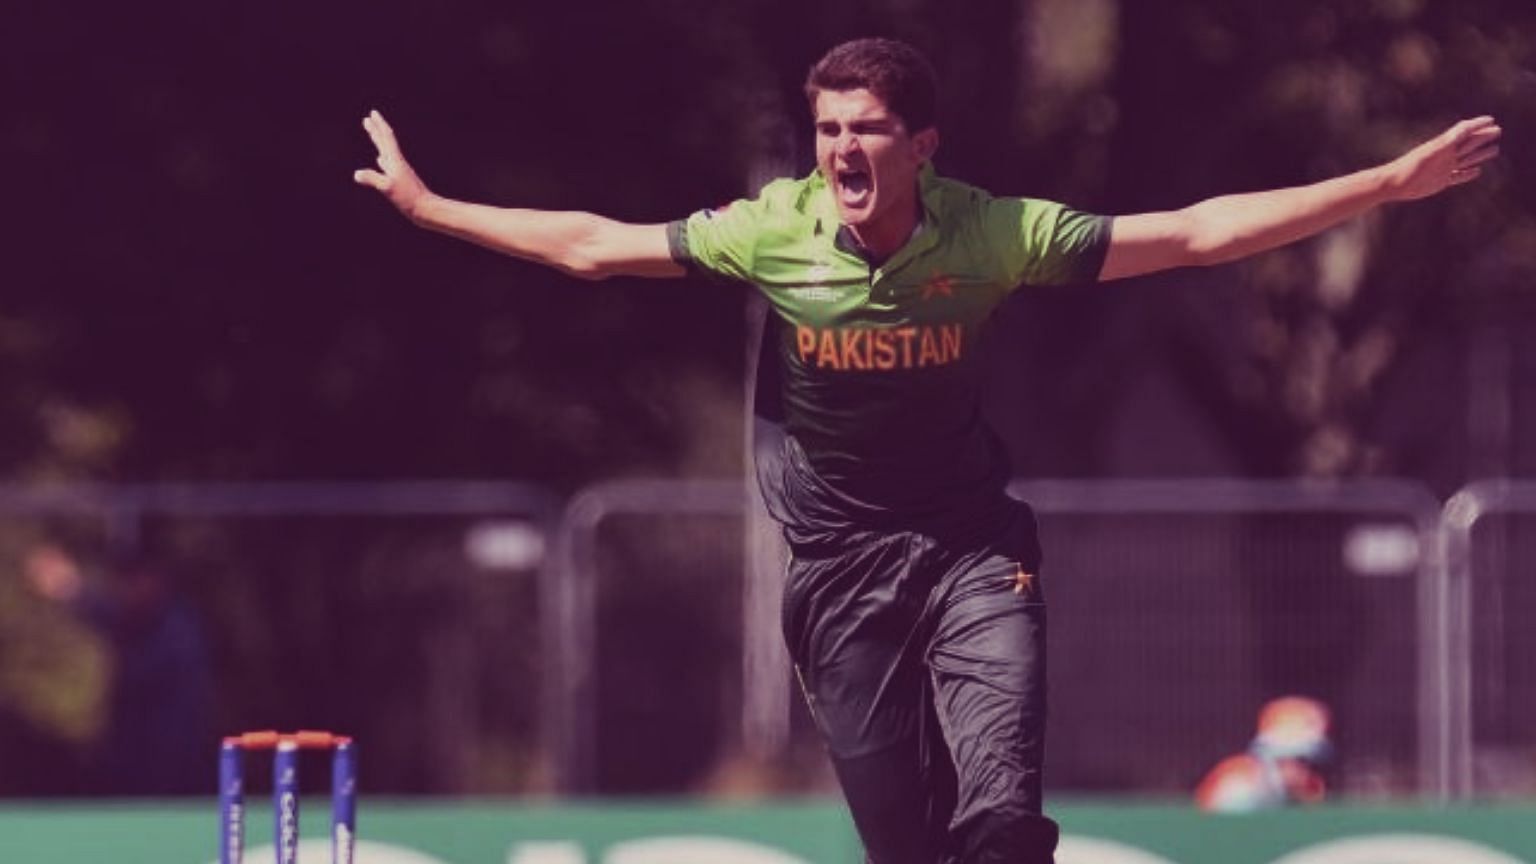 File photo of Shaheen Afridi from the Under-19 World Cup in New Zealand earlier this year.